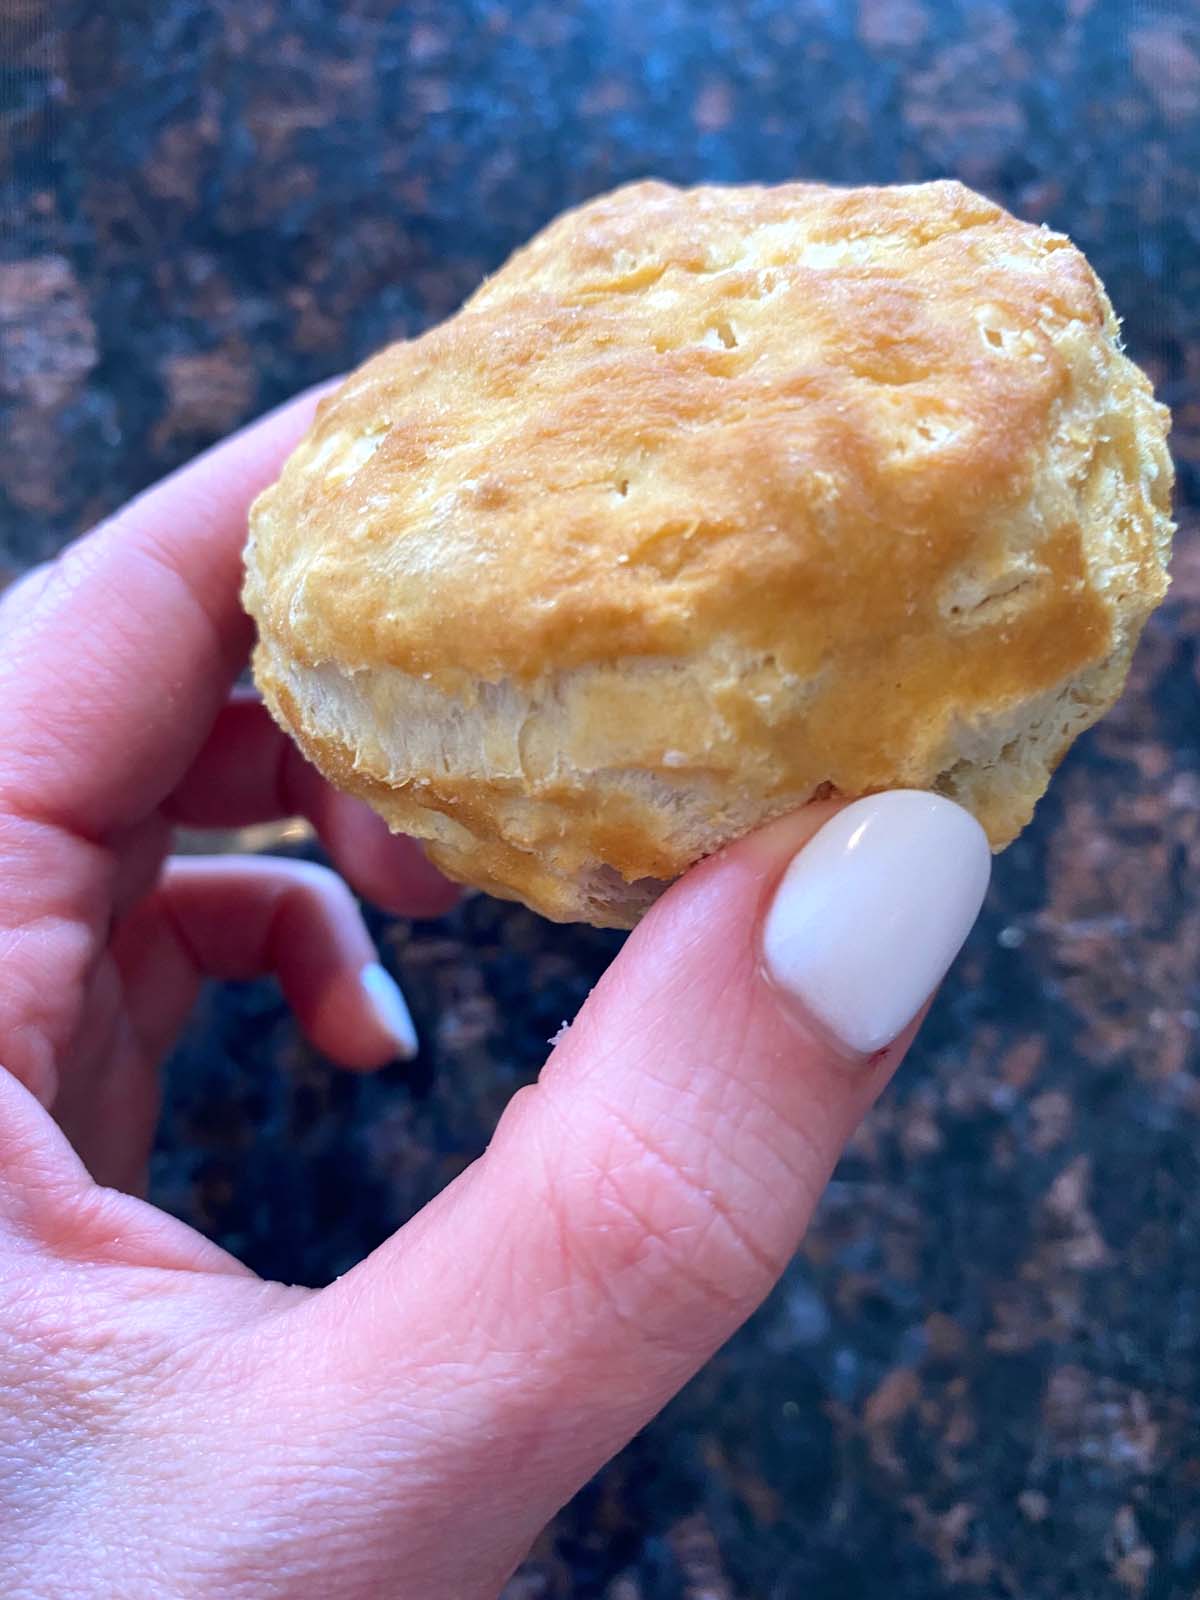 An up close look at a cooked biscuit.